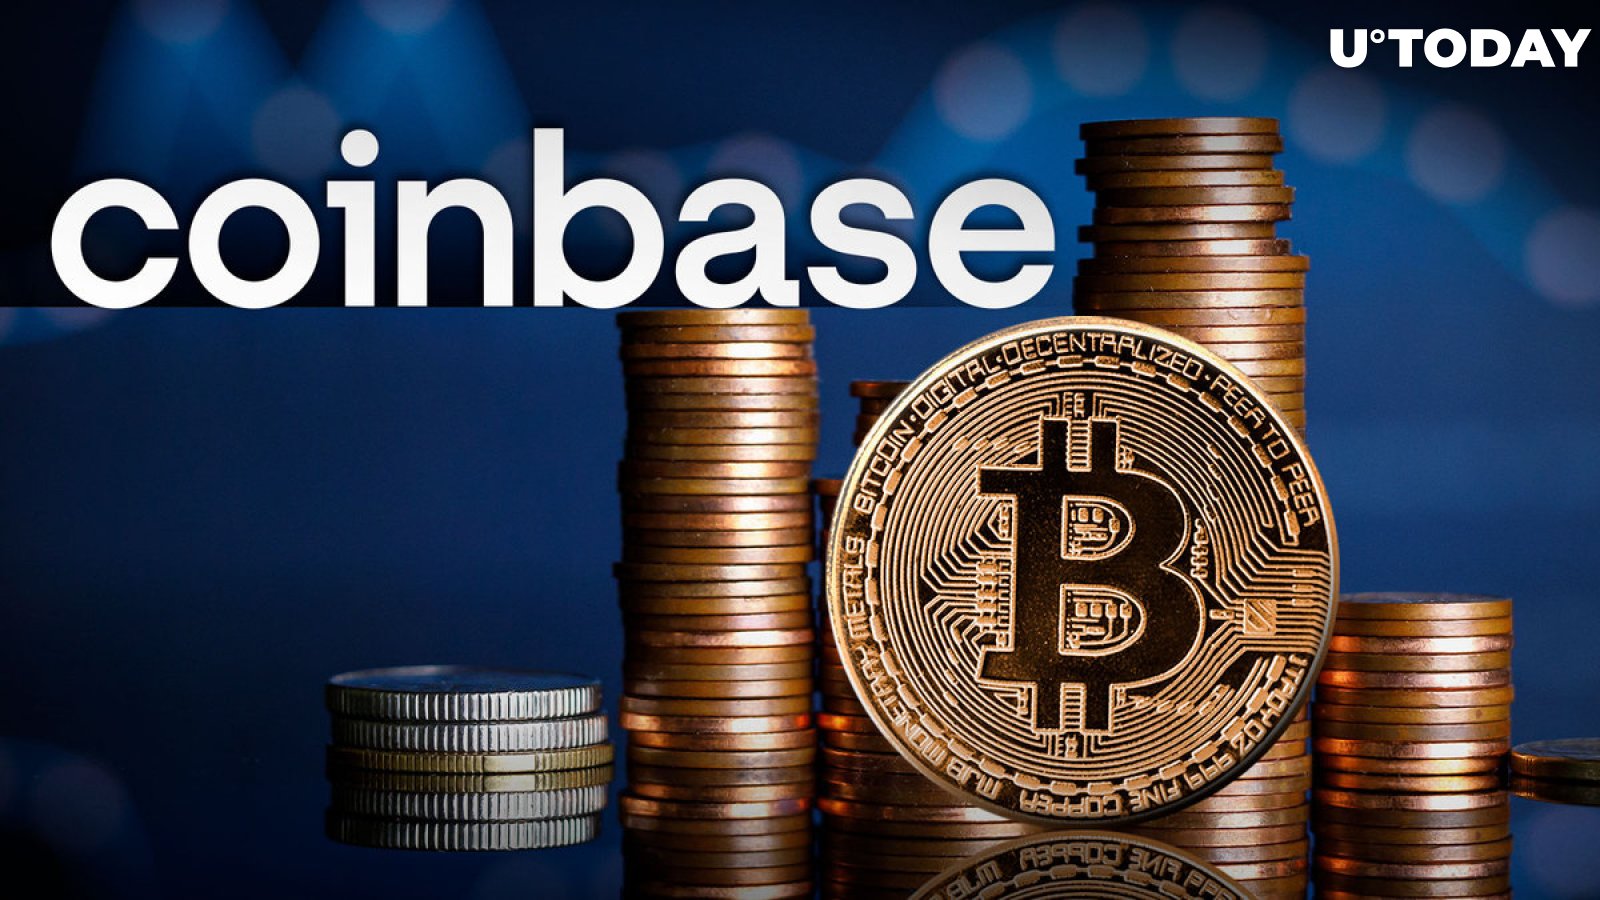 Bitcoin Price Drop: $314 Million BTC Transferred from Coinbase to Unknown Wallet